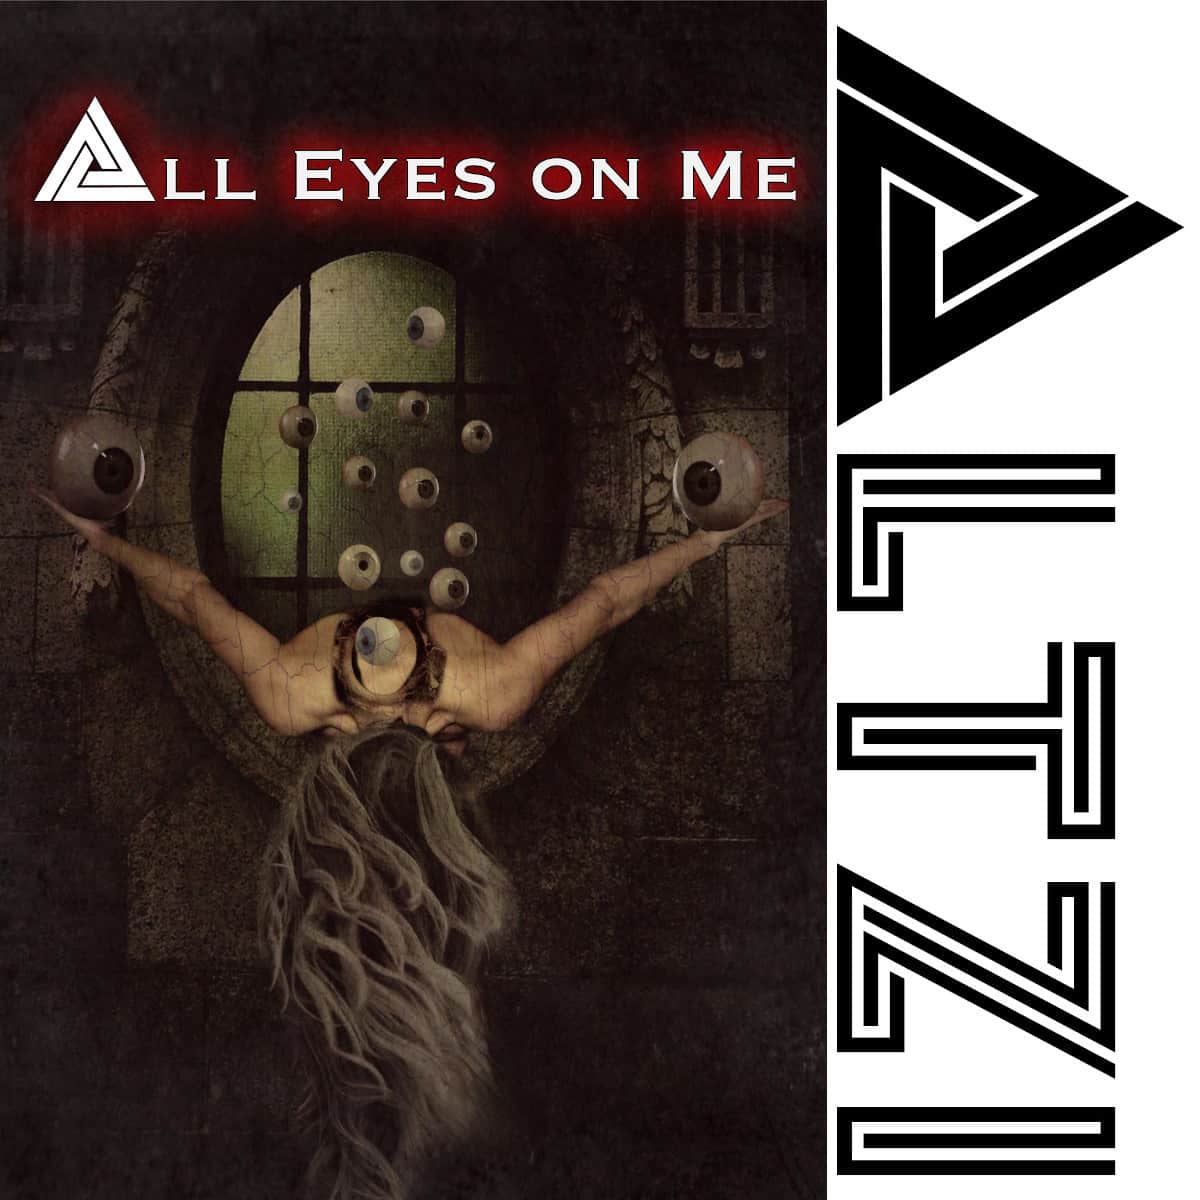 Altzi - All eyes on me